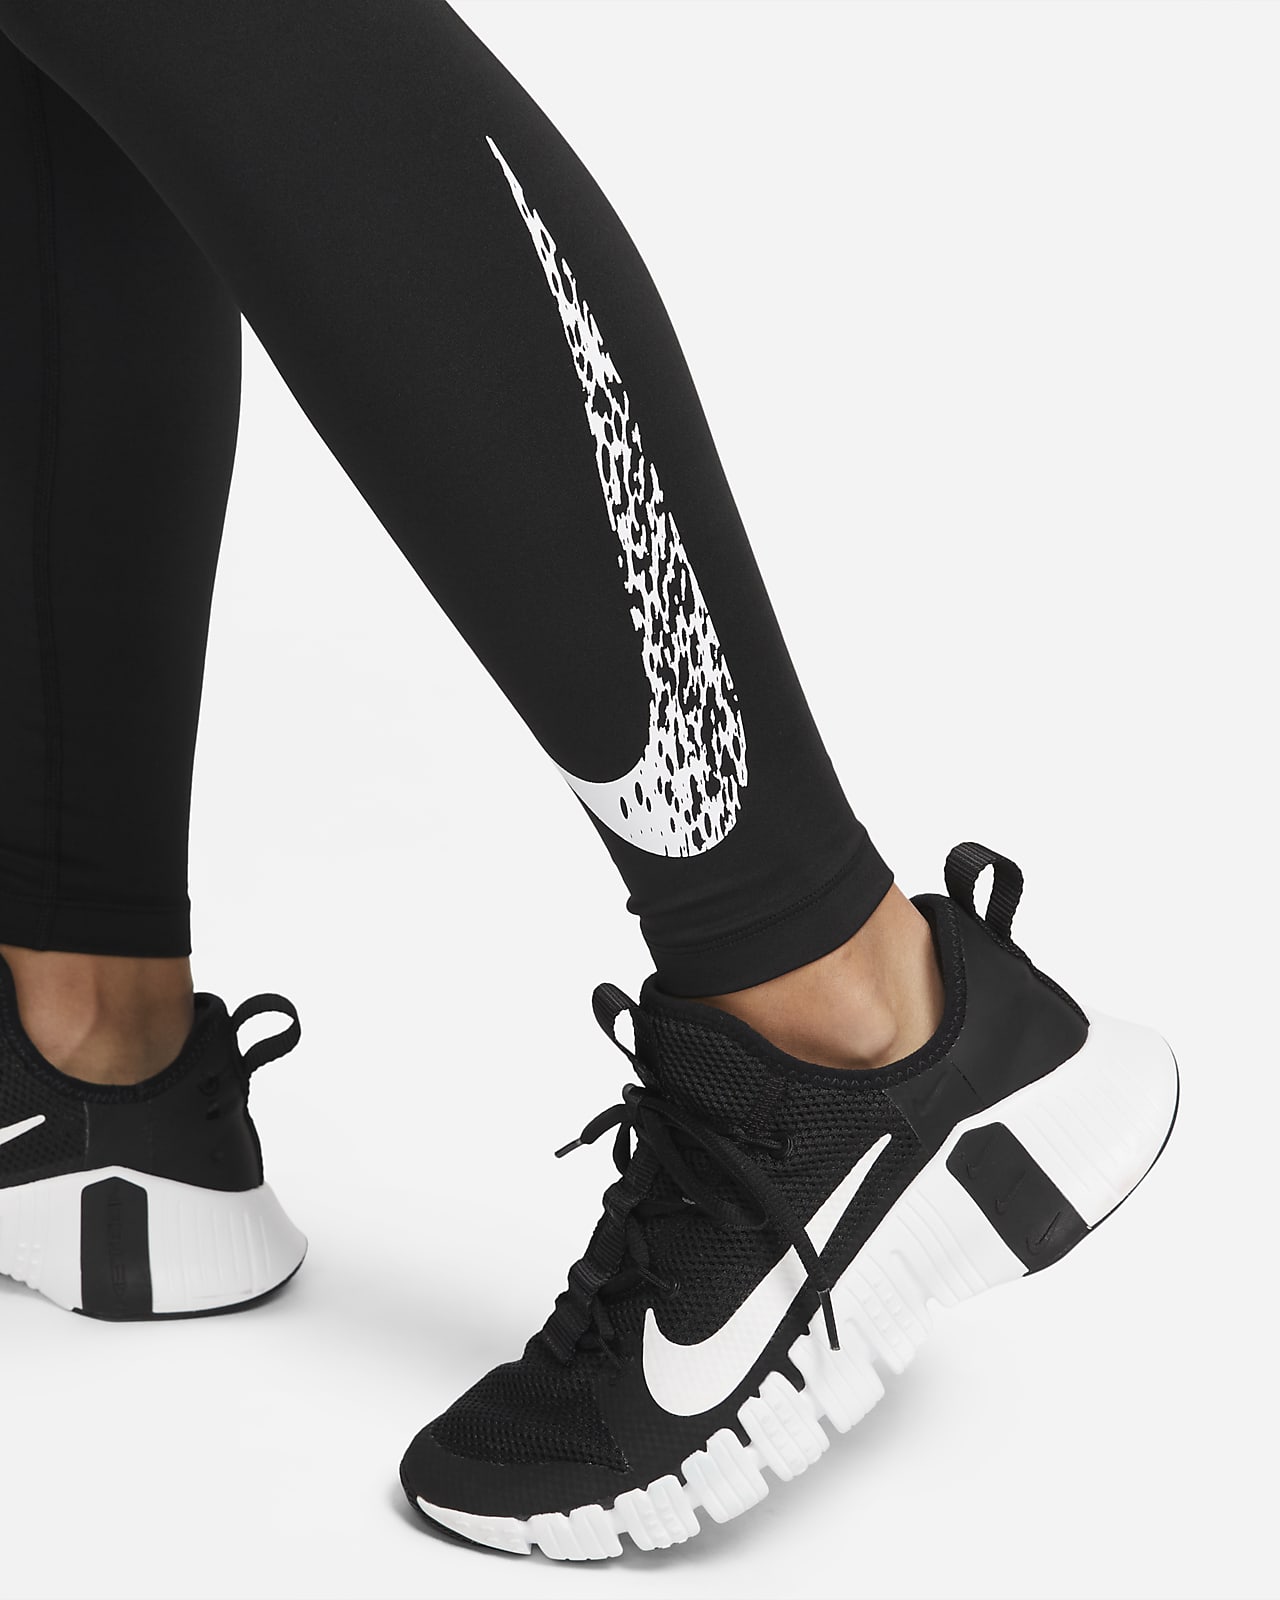 Nike NWT Swoosh Run 7/8 Running Leggings Black Size XS - $38 New With Tags  - From Mel